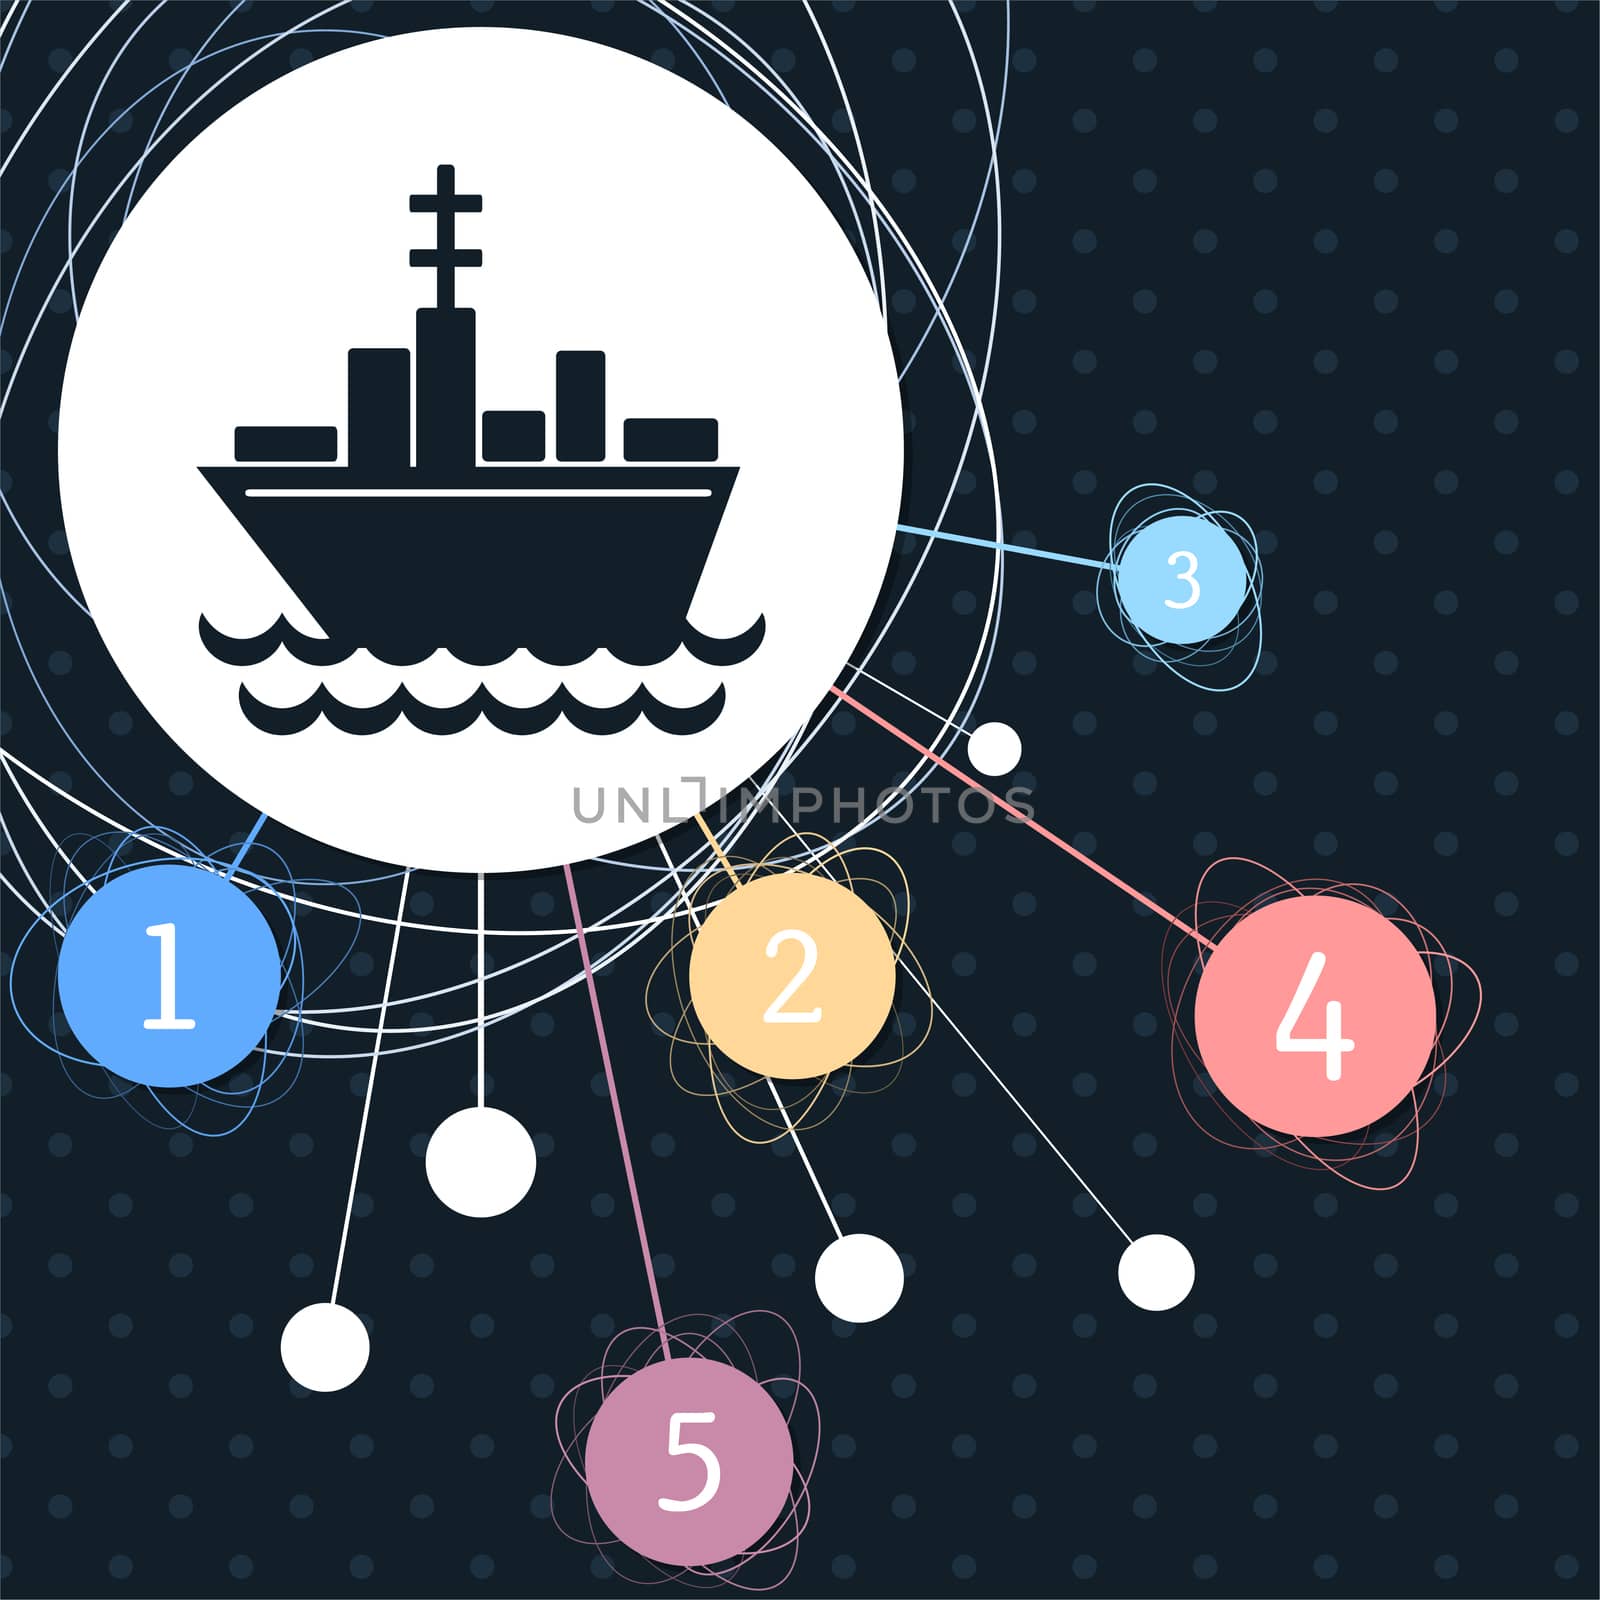 Ship boat icon with the background to the point and with infographic style. illustration